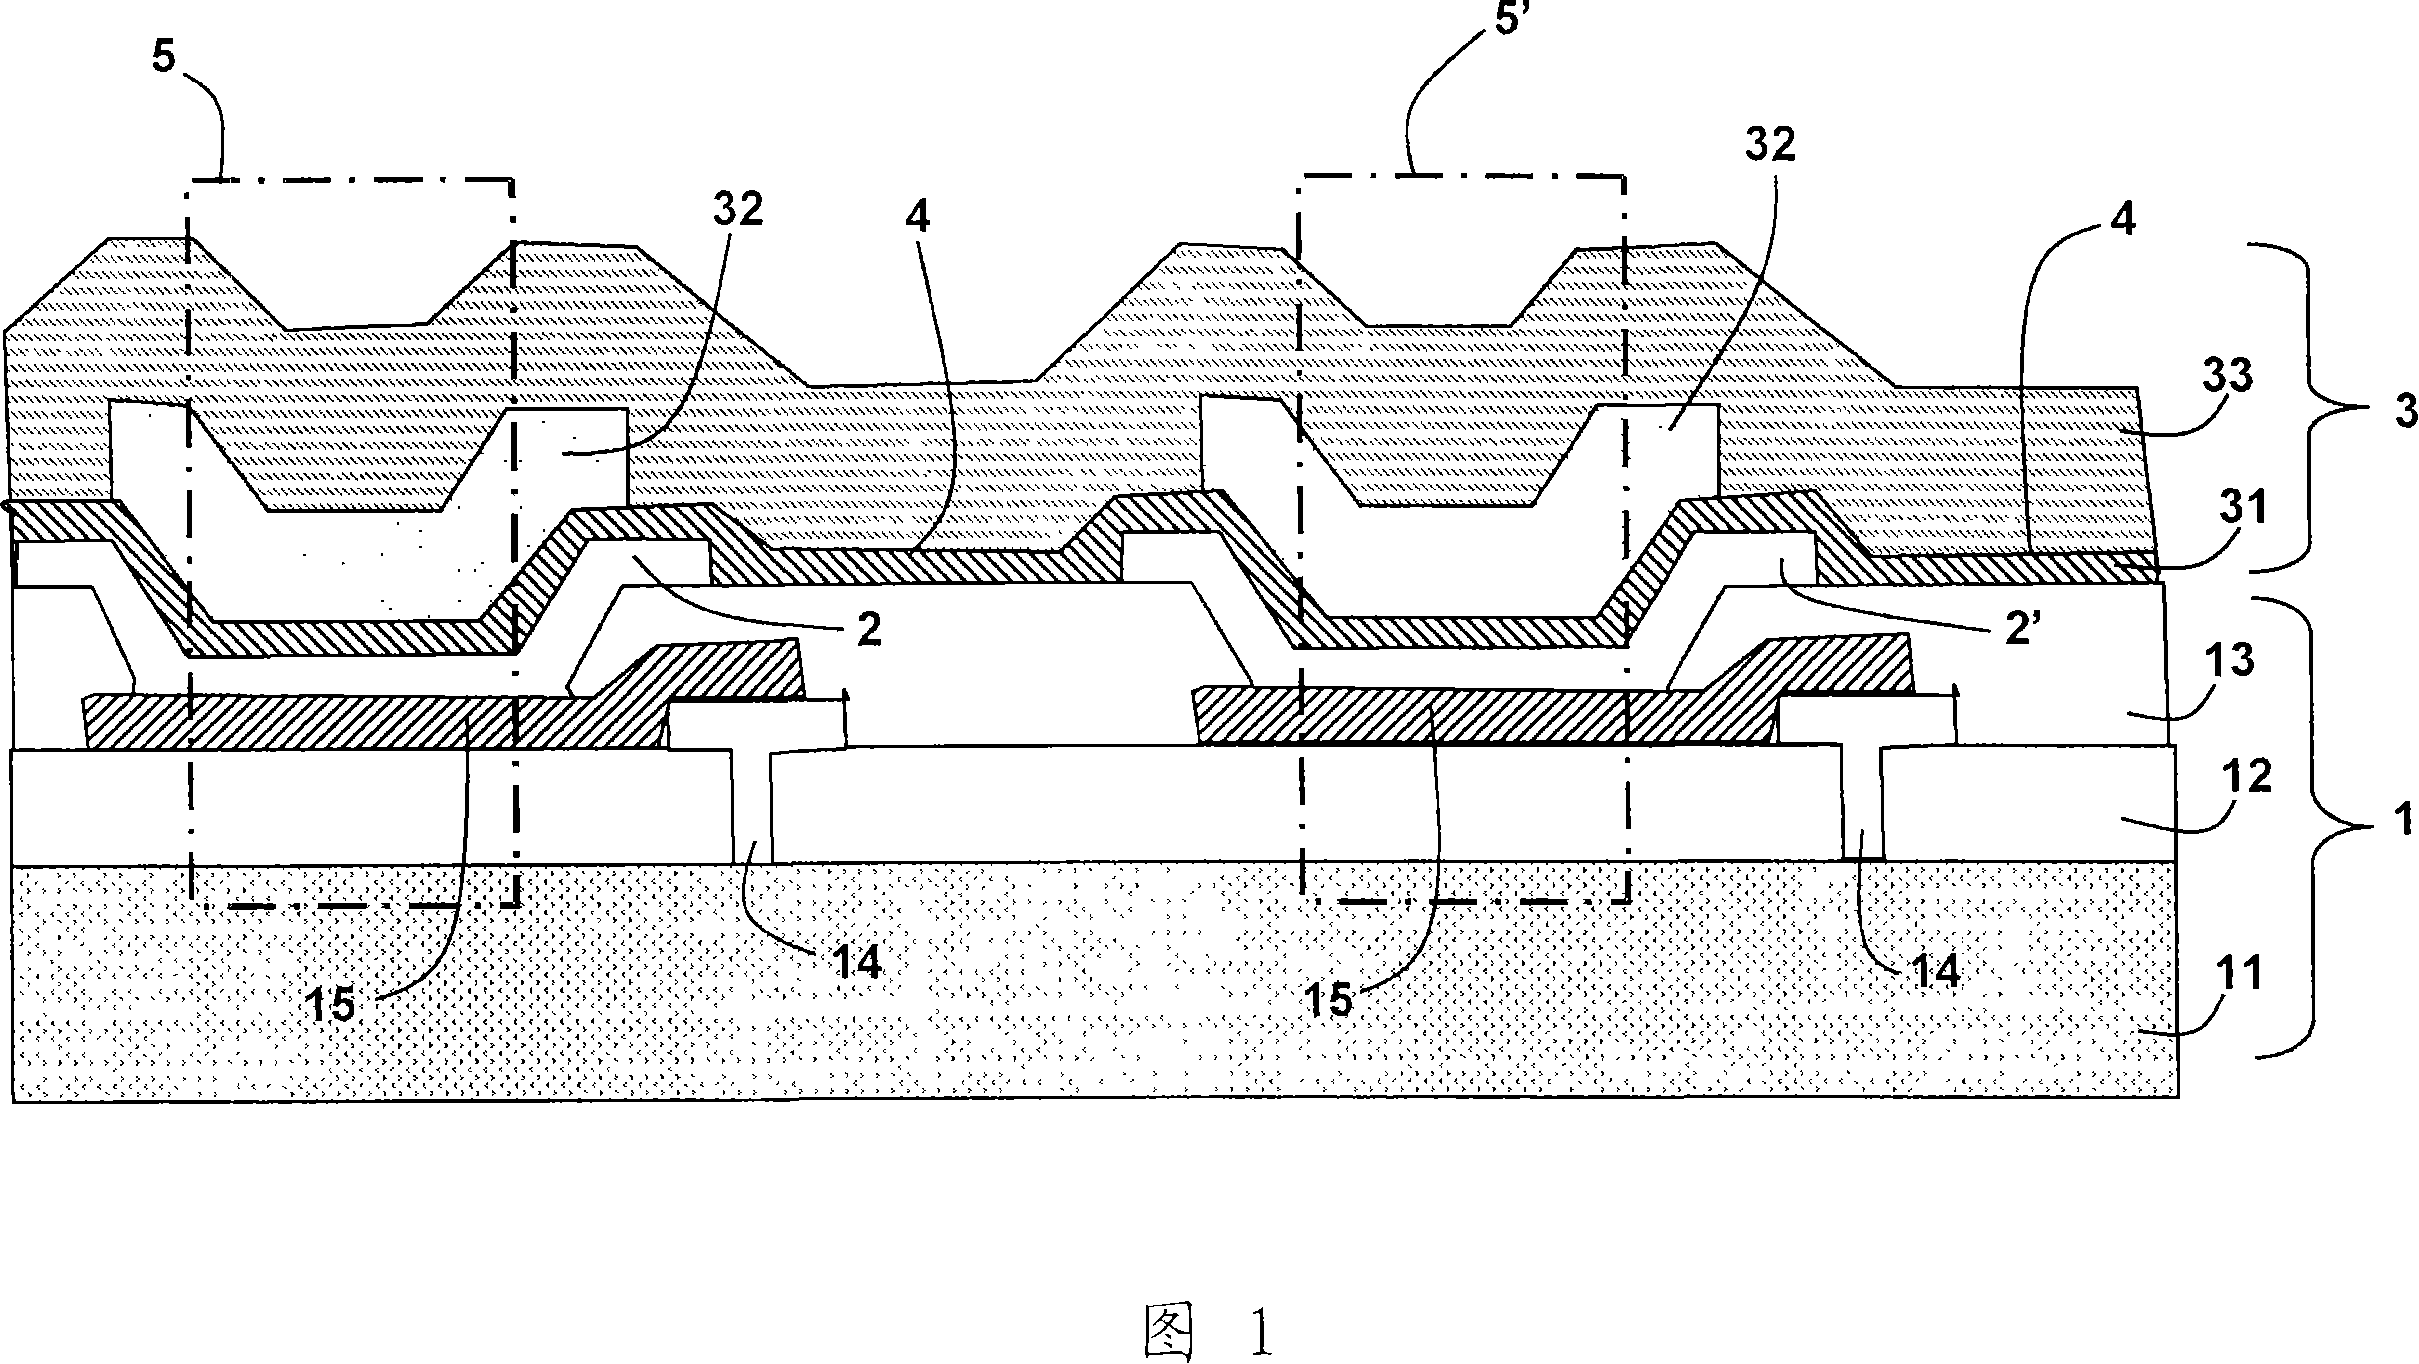 Light-emitting panel for illuminating or displaying images provided with a composite transparent upper electrode